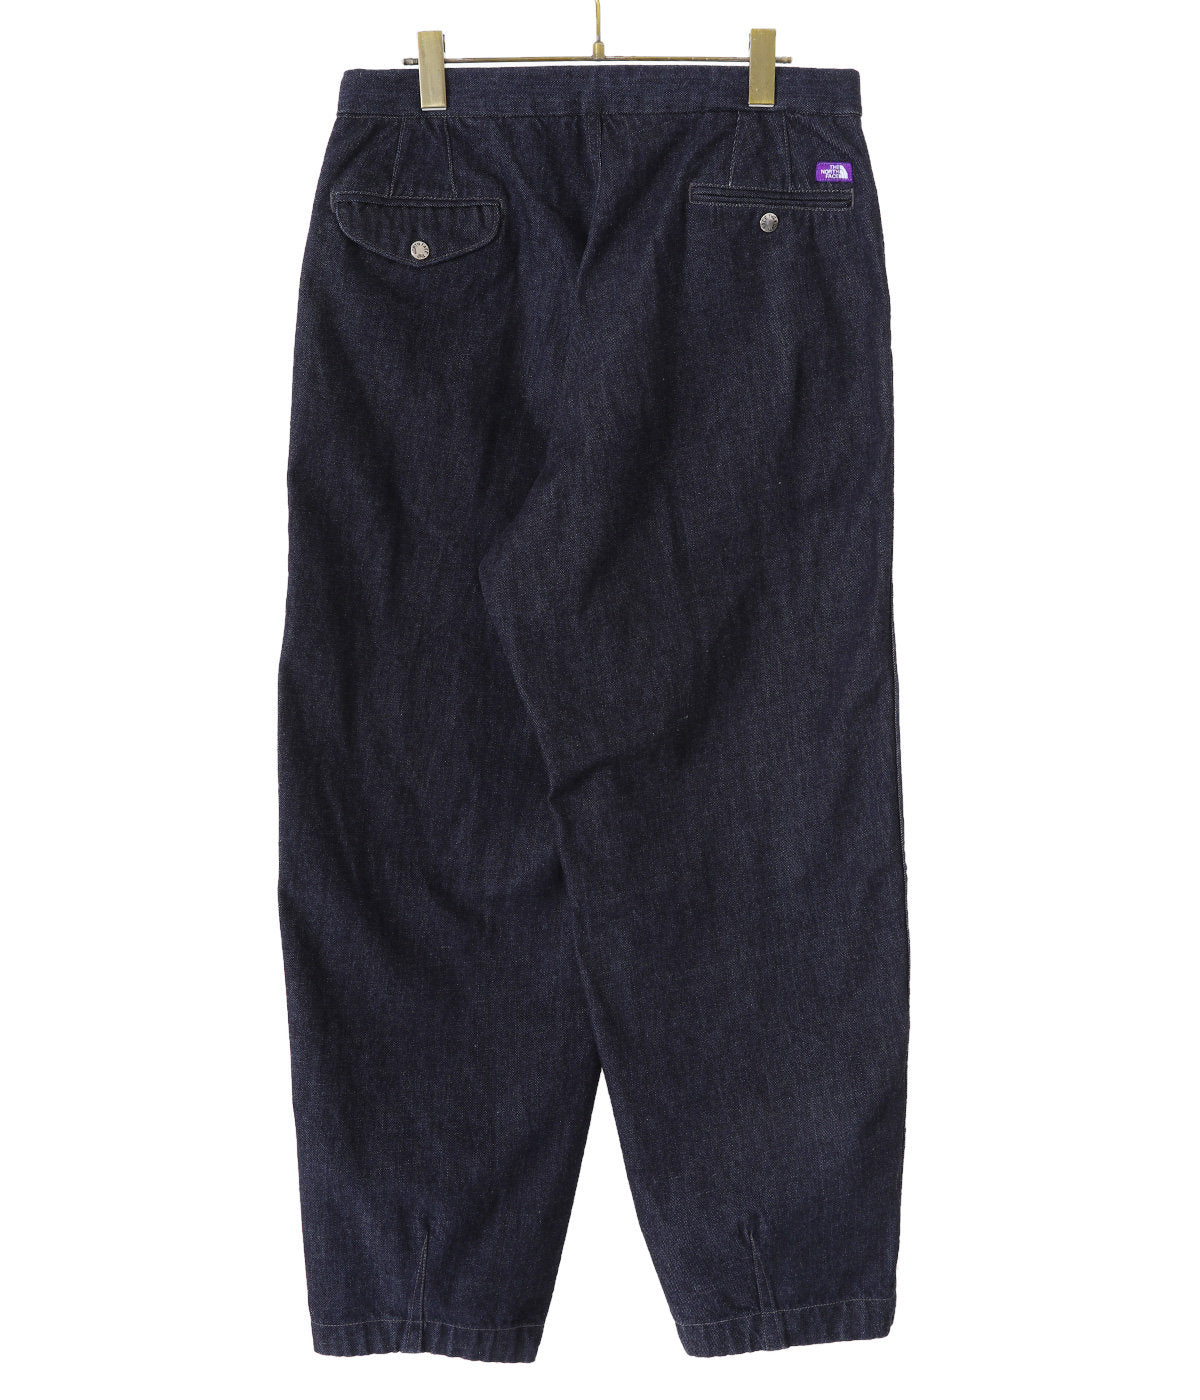 THE NORTH FACE PURPLE LABEL Denim Wide Tapered Pants